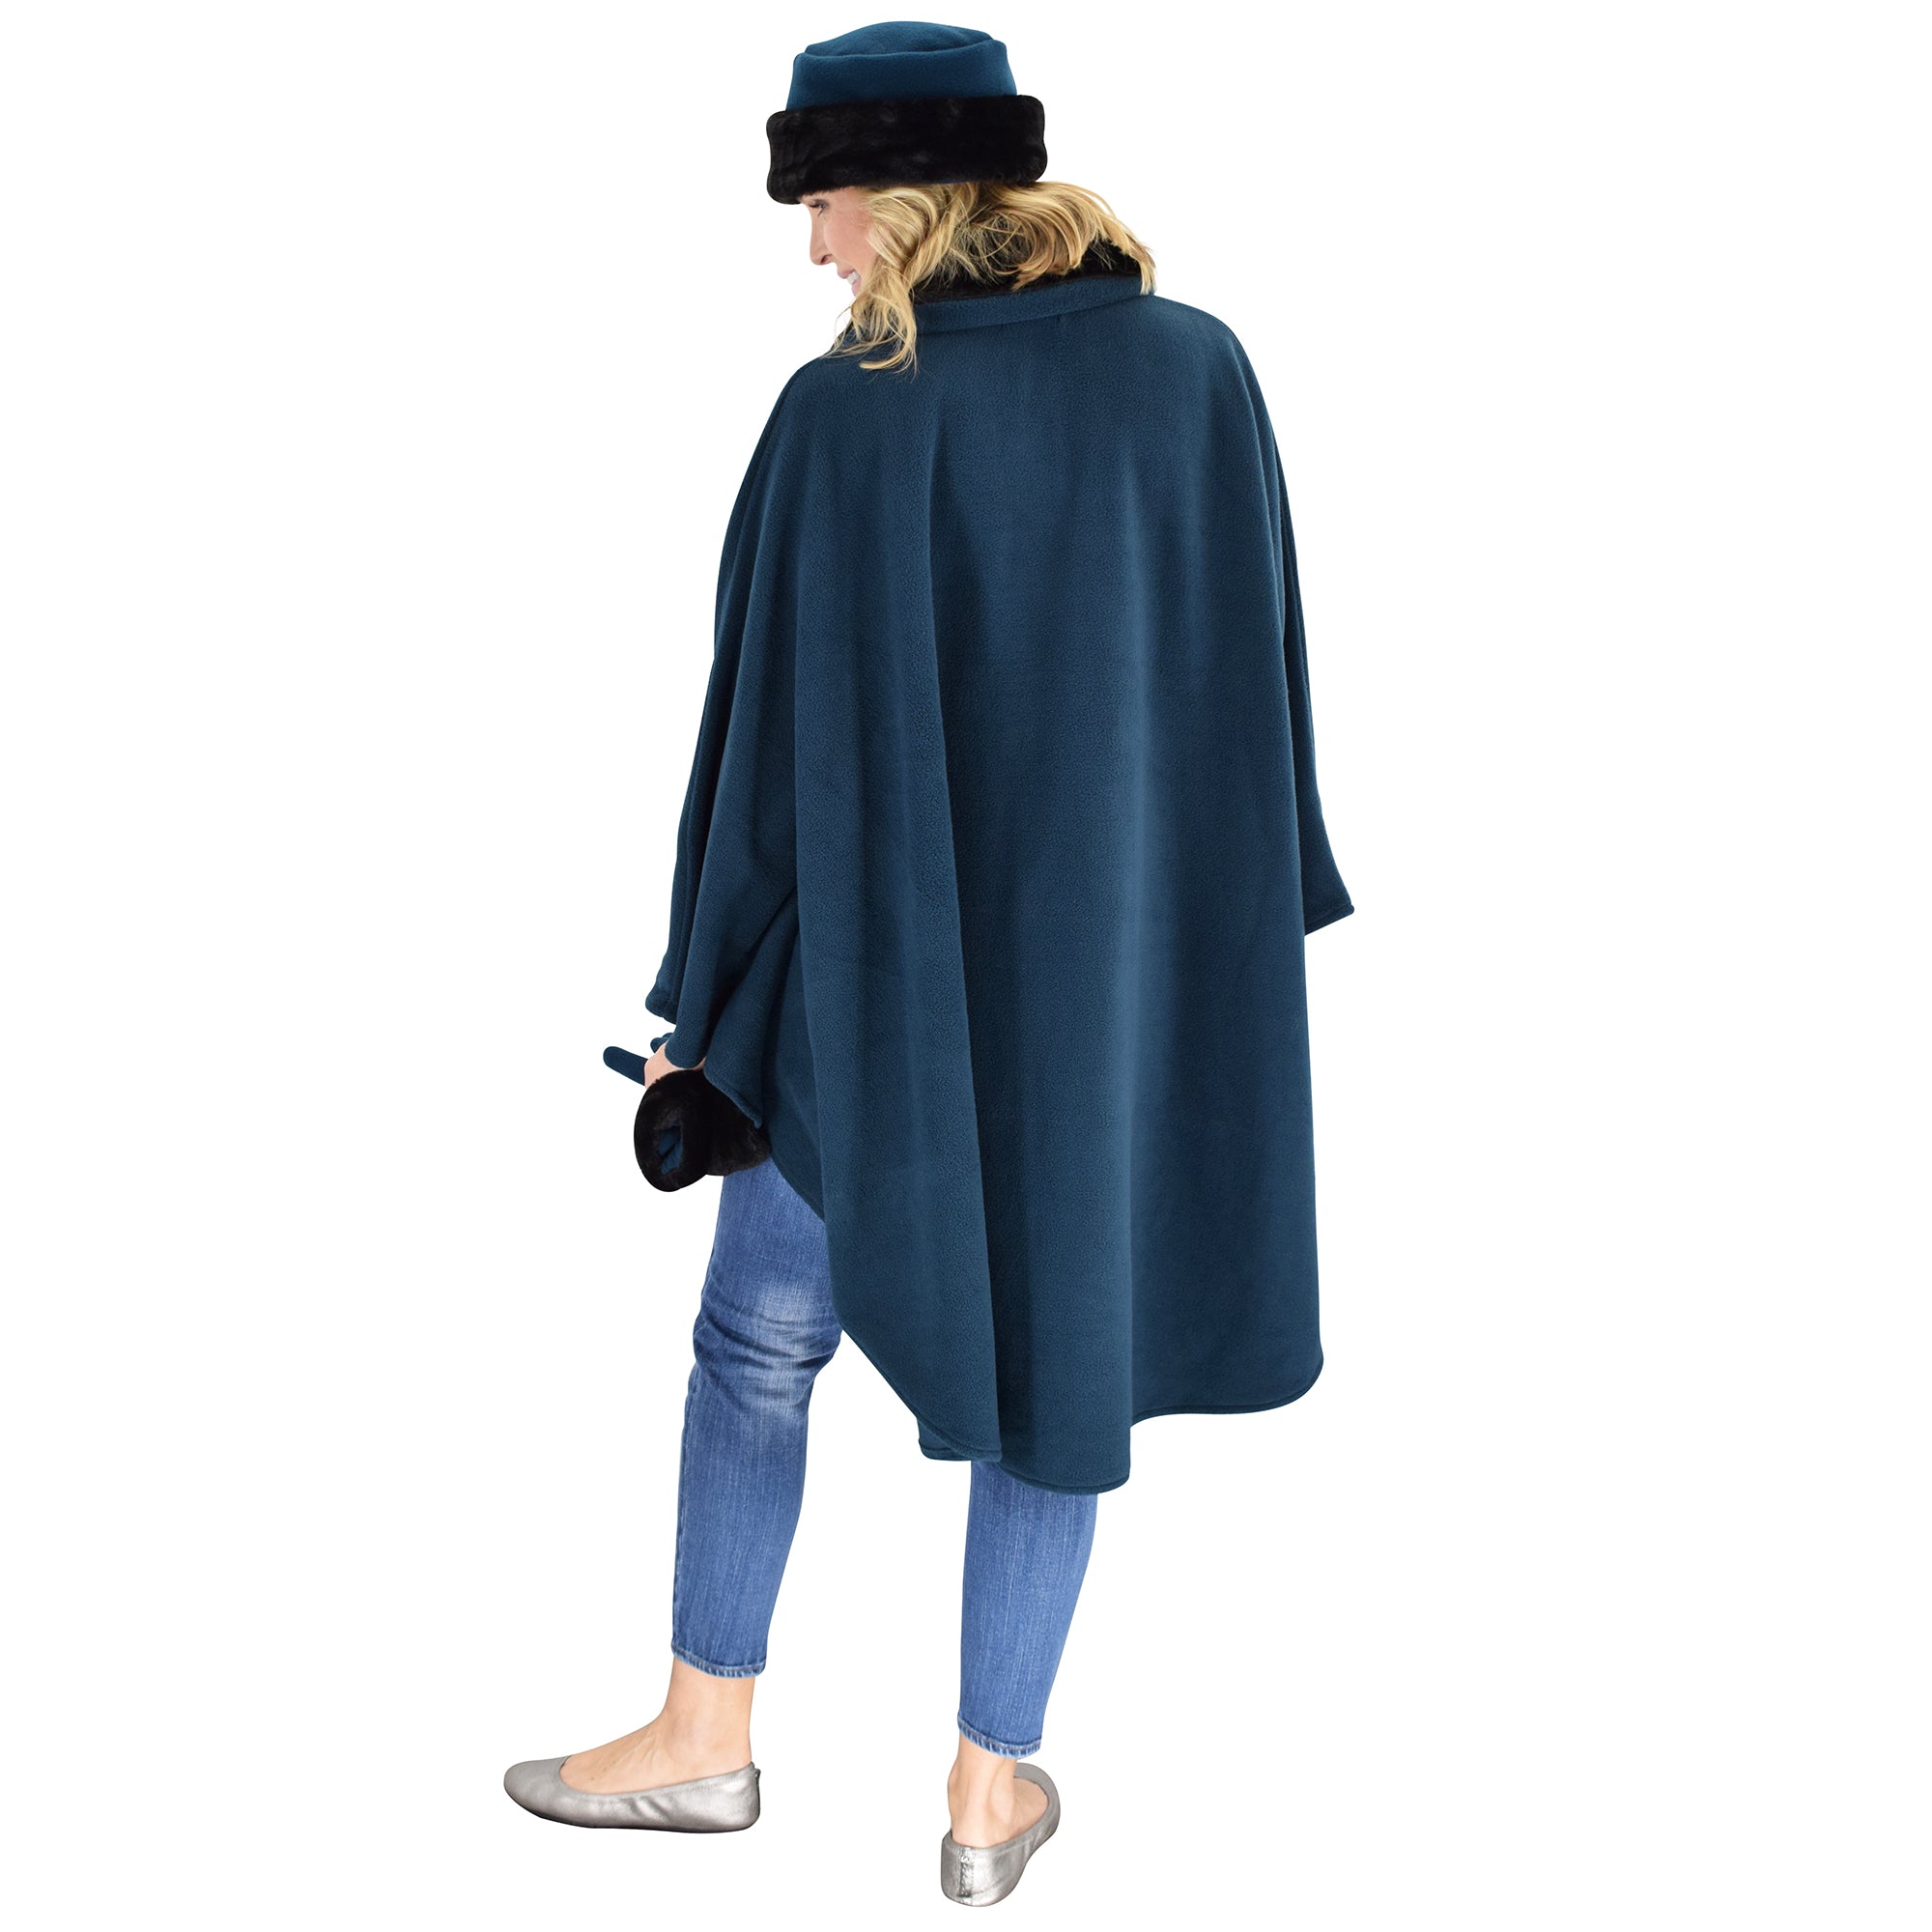 Le Moda Women's Black Fur Collar Polar Fleece Wrap with Matching Gloves and Hat-One Size Fits All at Linda Anderson.  color_teal